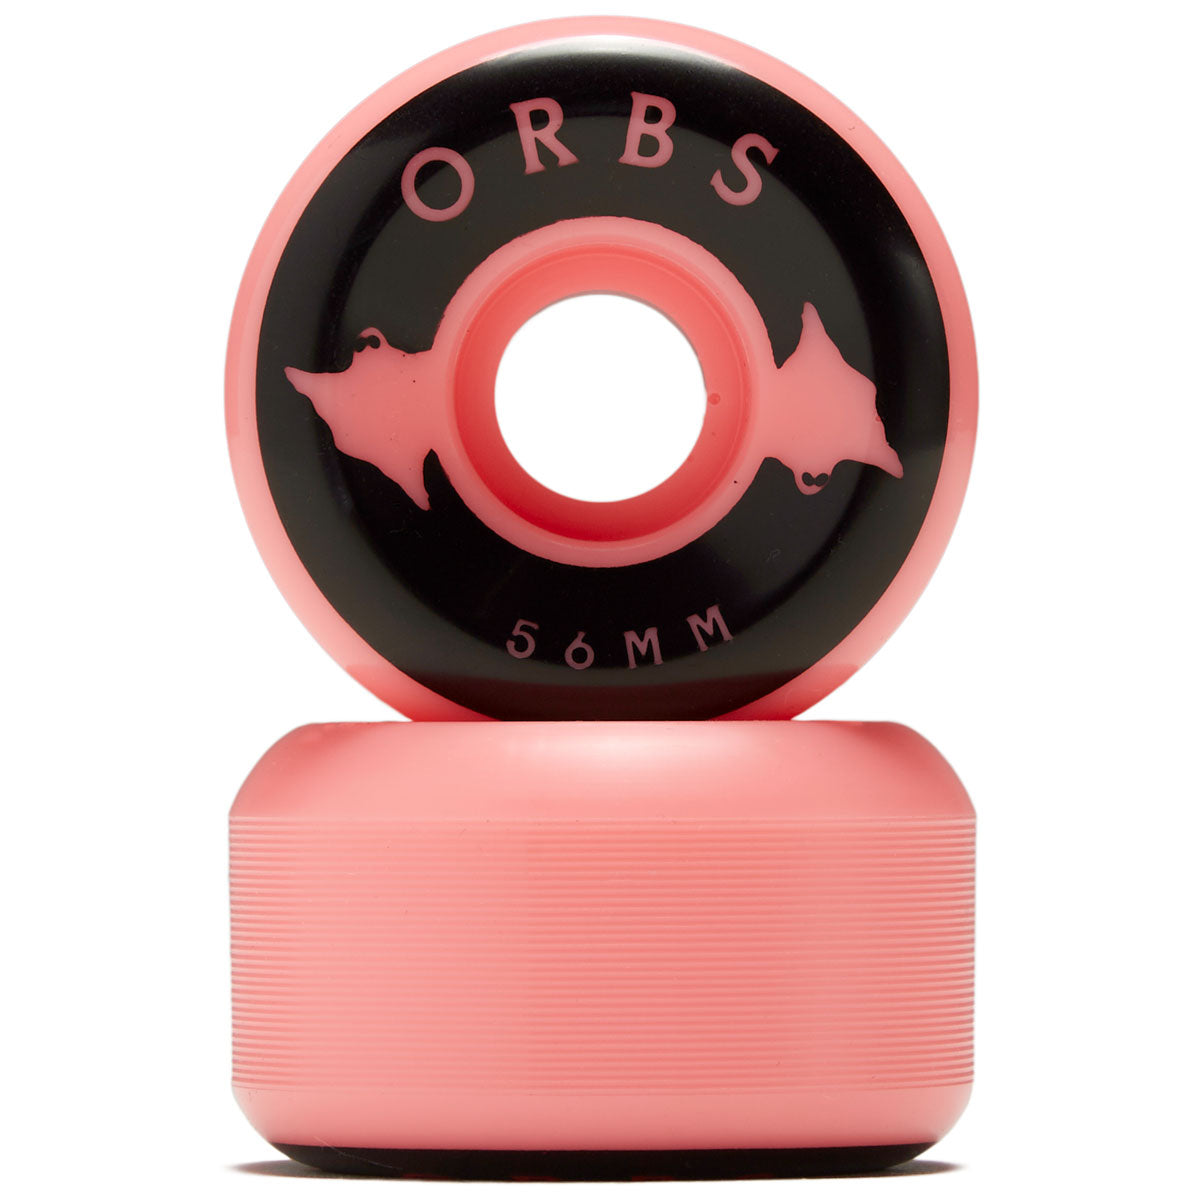 Welcome Orbs Specters Conical 99A Skateboard Wheels - Neon Coral - 56mm image 2